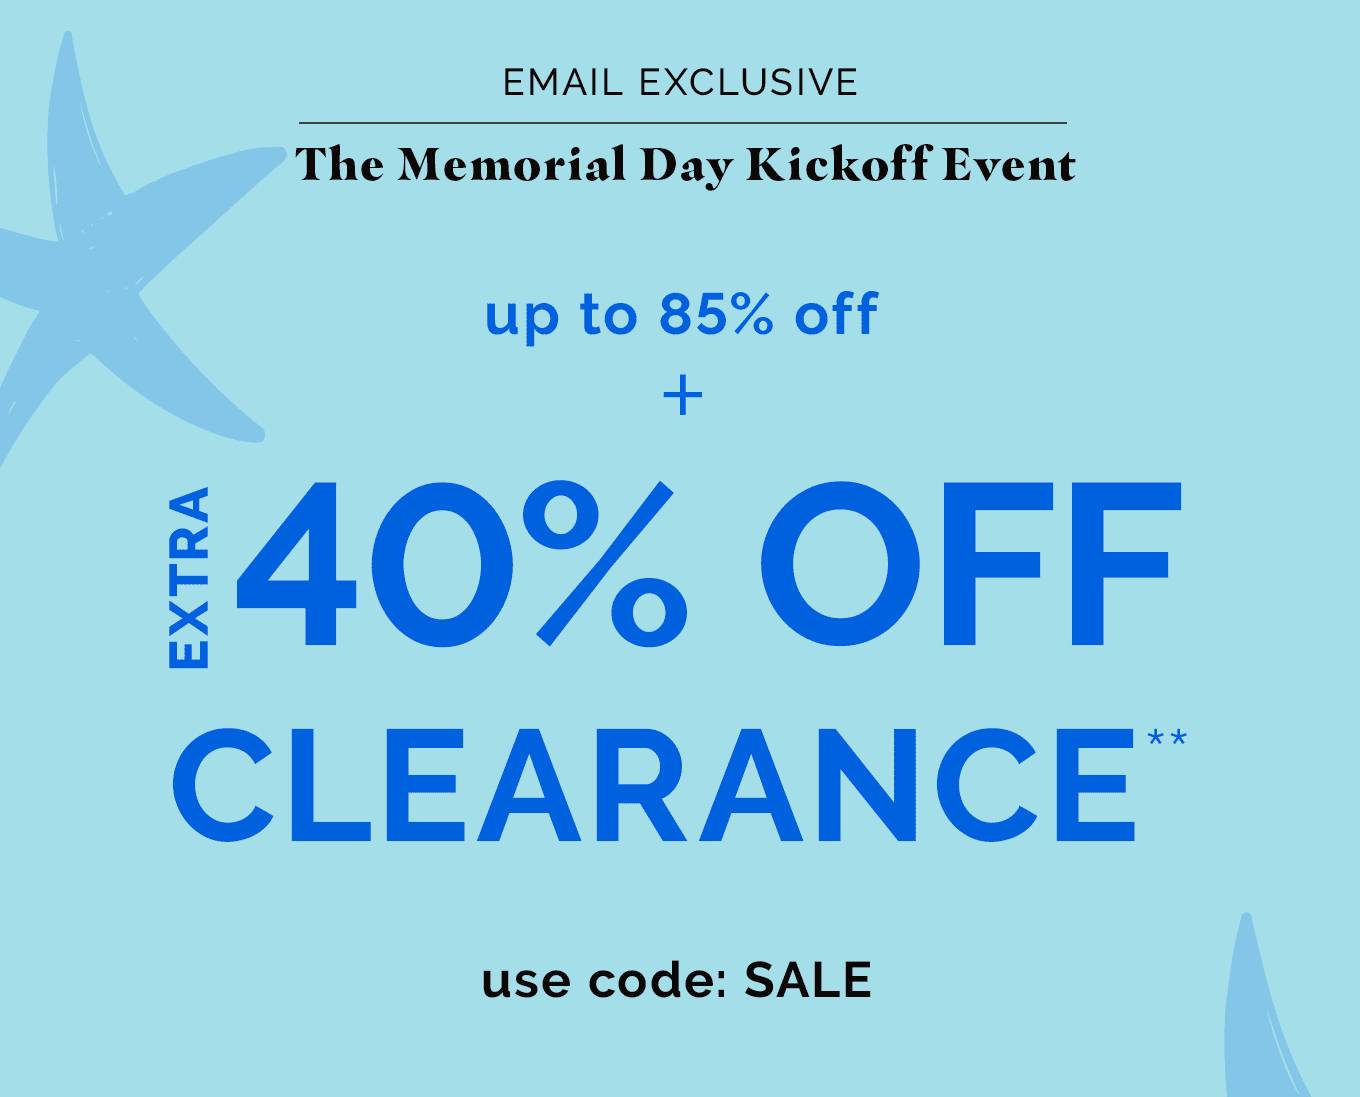 Email Exclusive | The Memorial Day Kickoff Event! up to 85% off + EXTRA 40% OFF CLEARANCE!** | use code: SALE